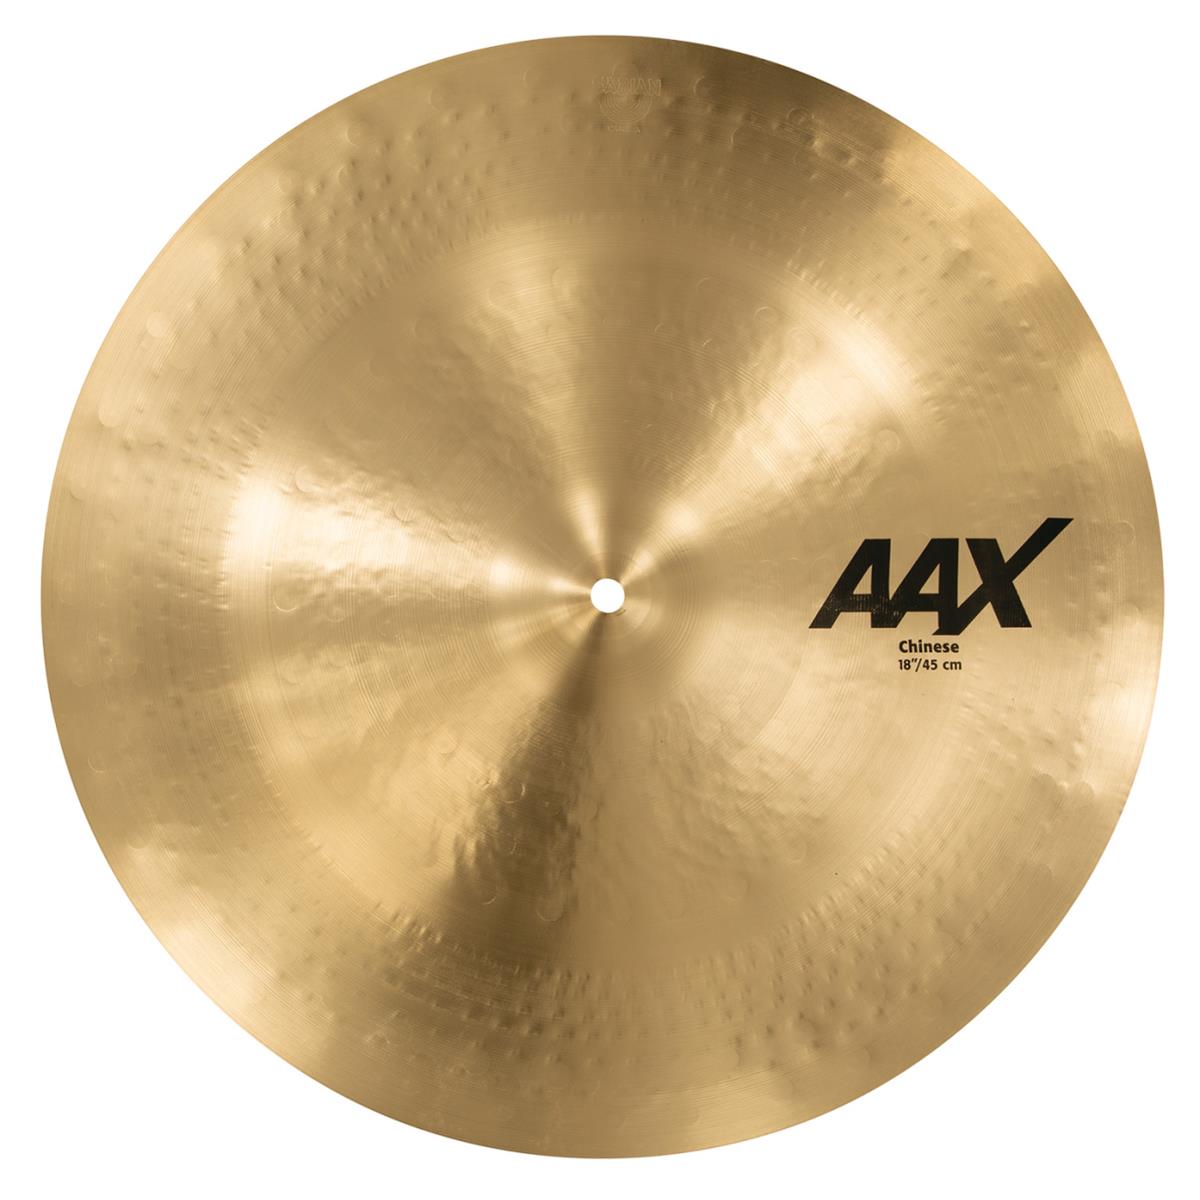 Sabian 18" AAX Chinese Cymbal, Thin Sabian 18" AAX Chinese delivers Modern Bright, biting response that is big, brash and trashy. The Sabian AAX series delivers consistently bright, crisp, clear and cutting responses - AAX is the ultimate Modern Bright sound!